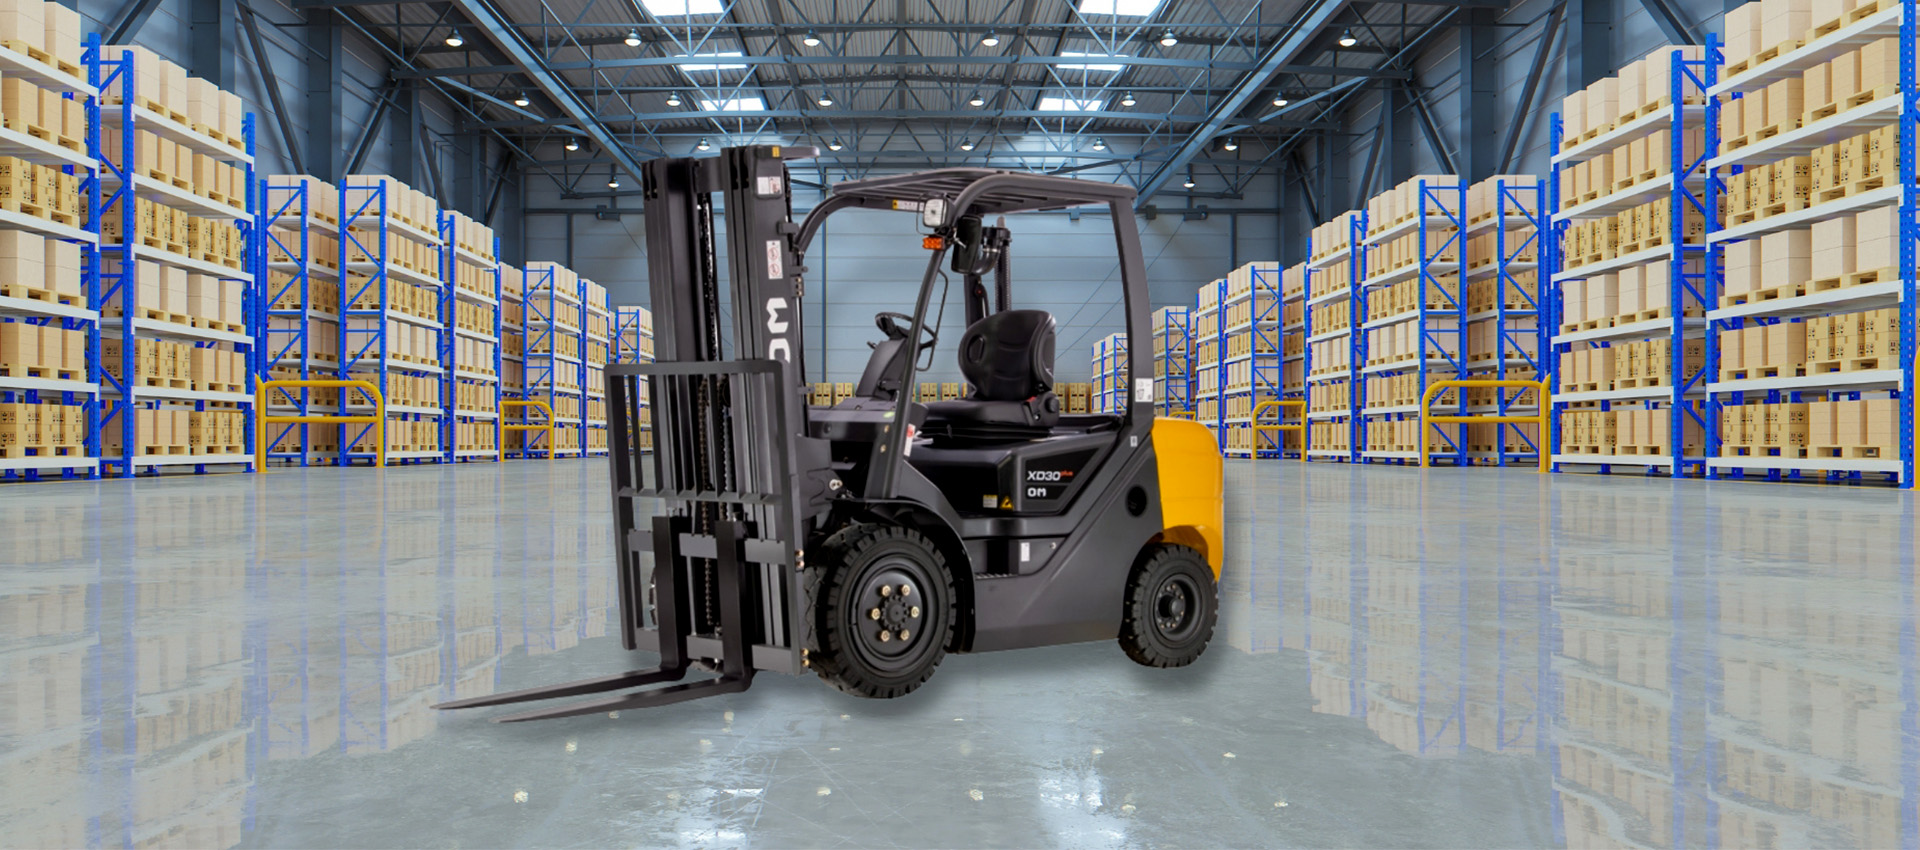 Indian Warehousing Industry after Covid-19 Bouncing Back stronger with reliability